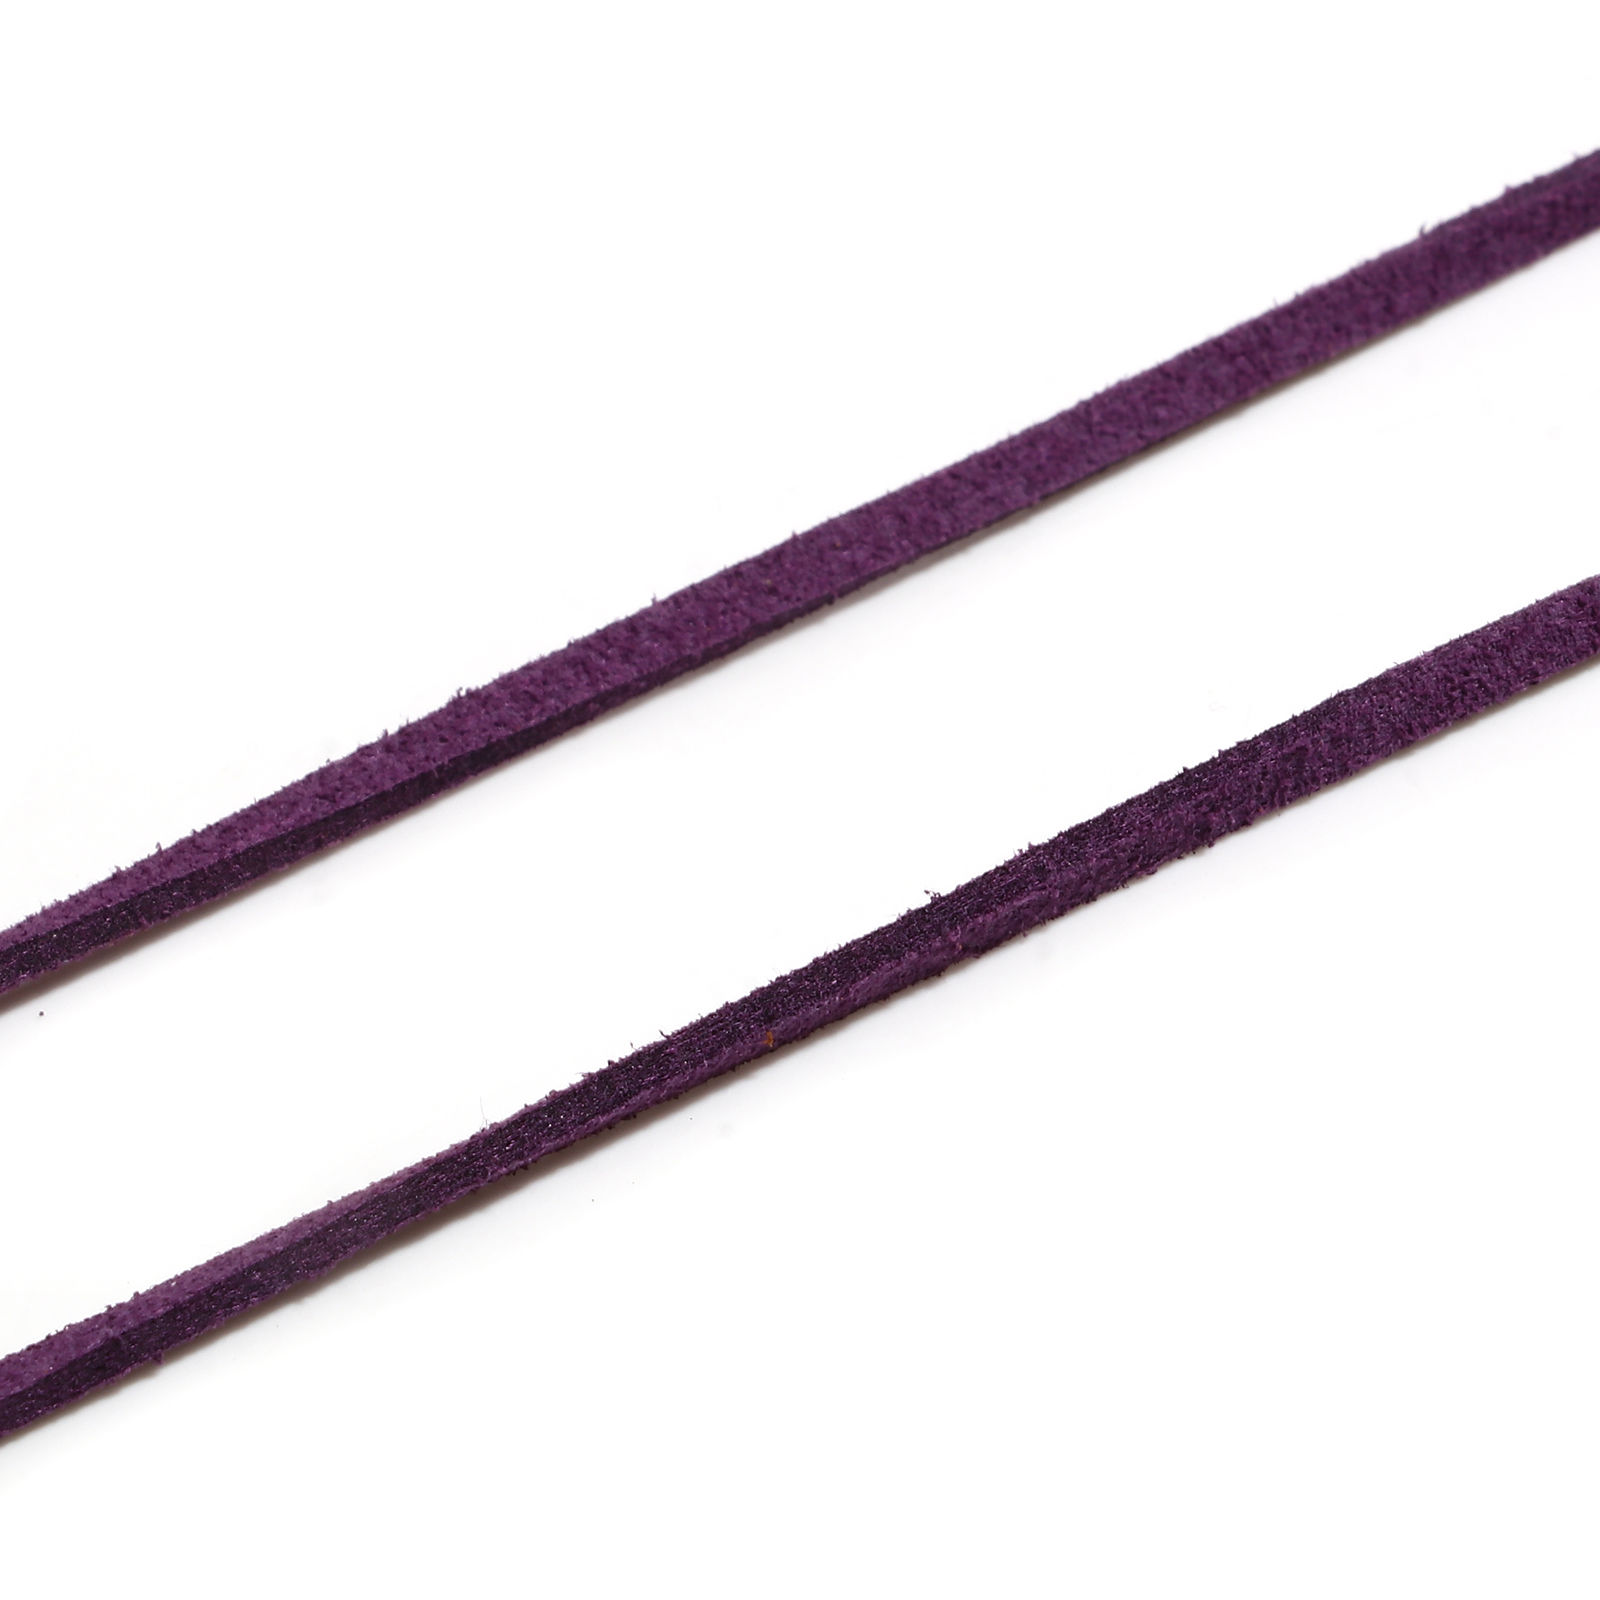 Picture of Velvet Jewelry Cord Rope Dark Purple Faux Suede 3mm, 1 Bundle (Approx 5 M/Bundle)